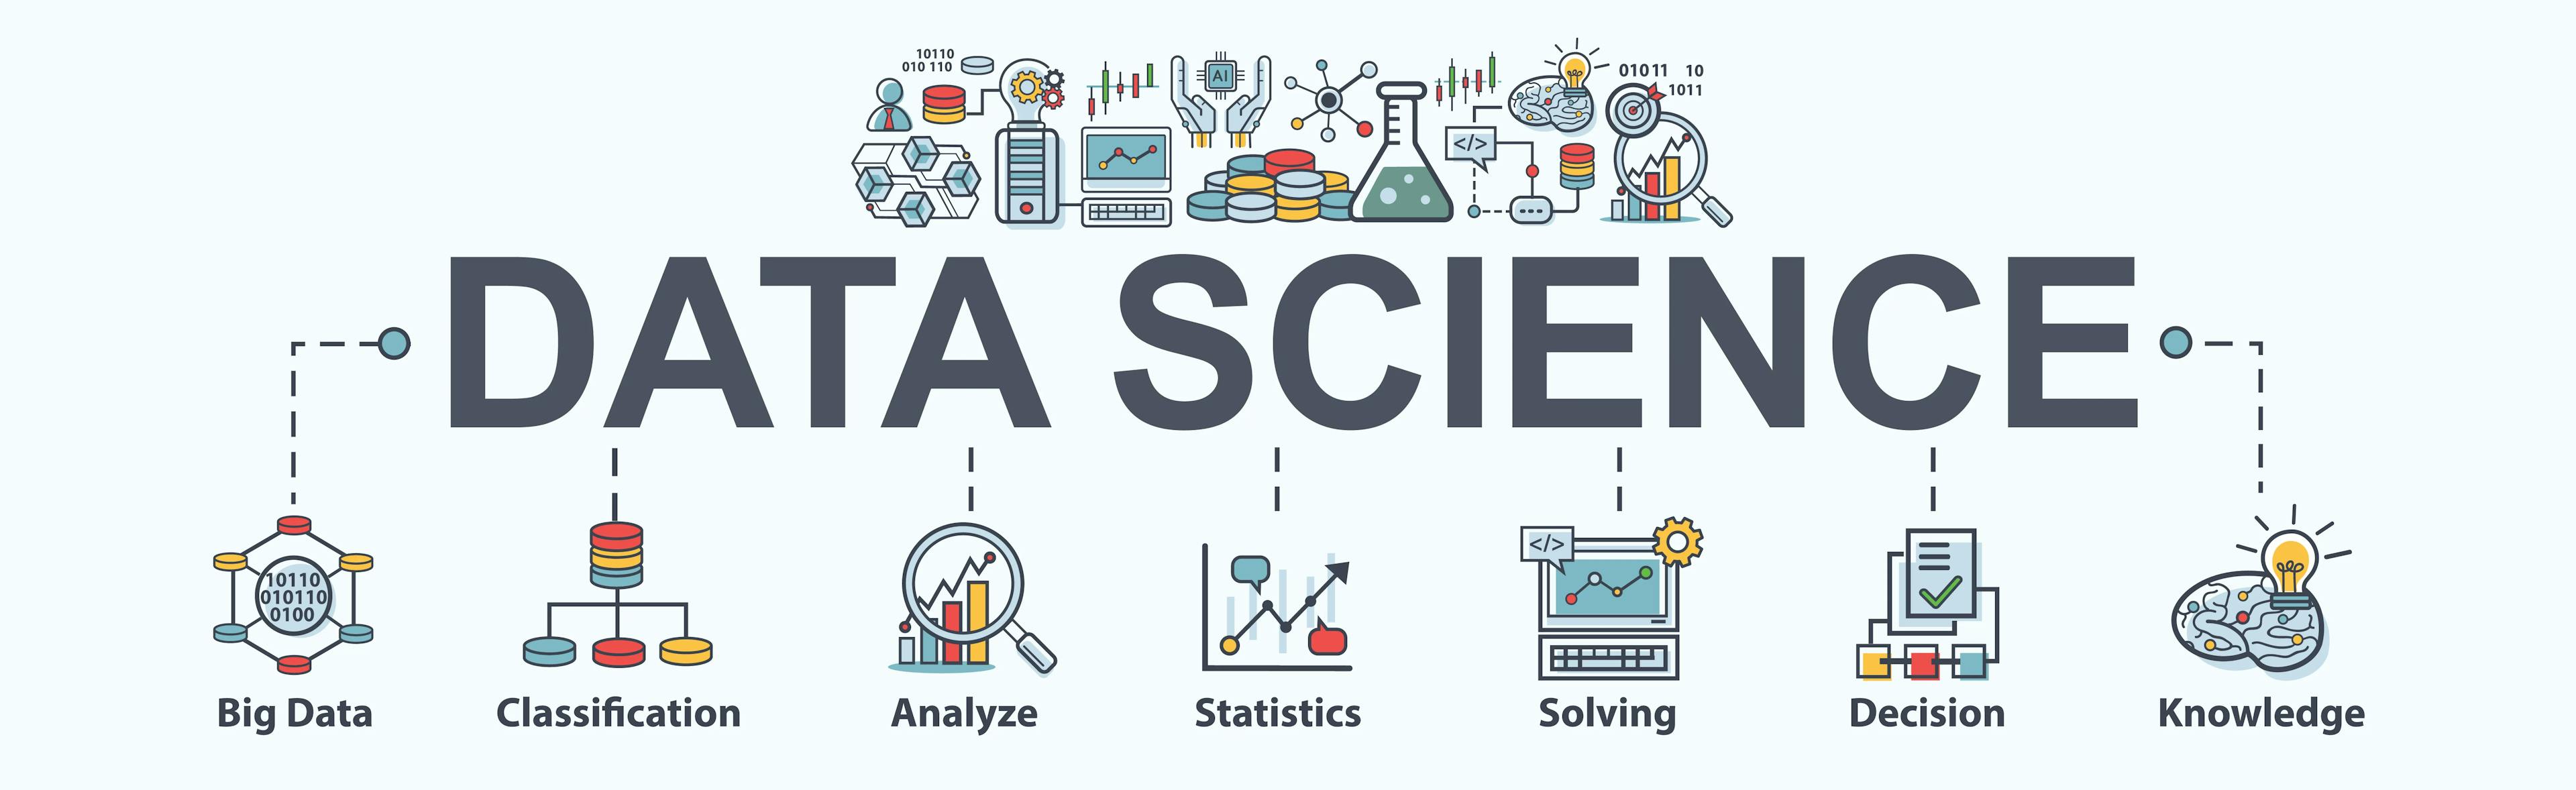 applications data science 